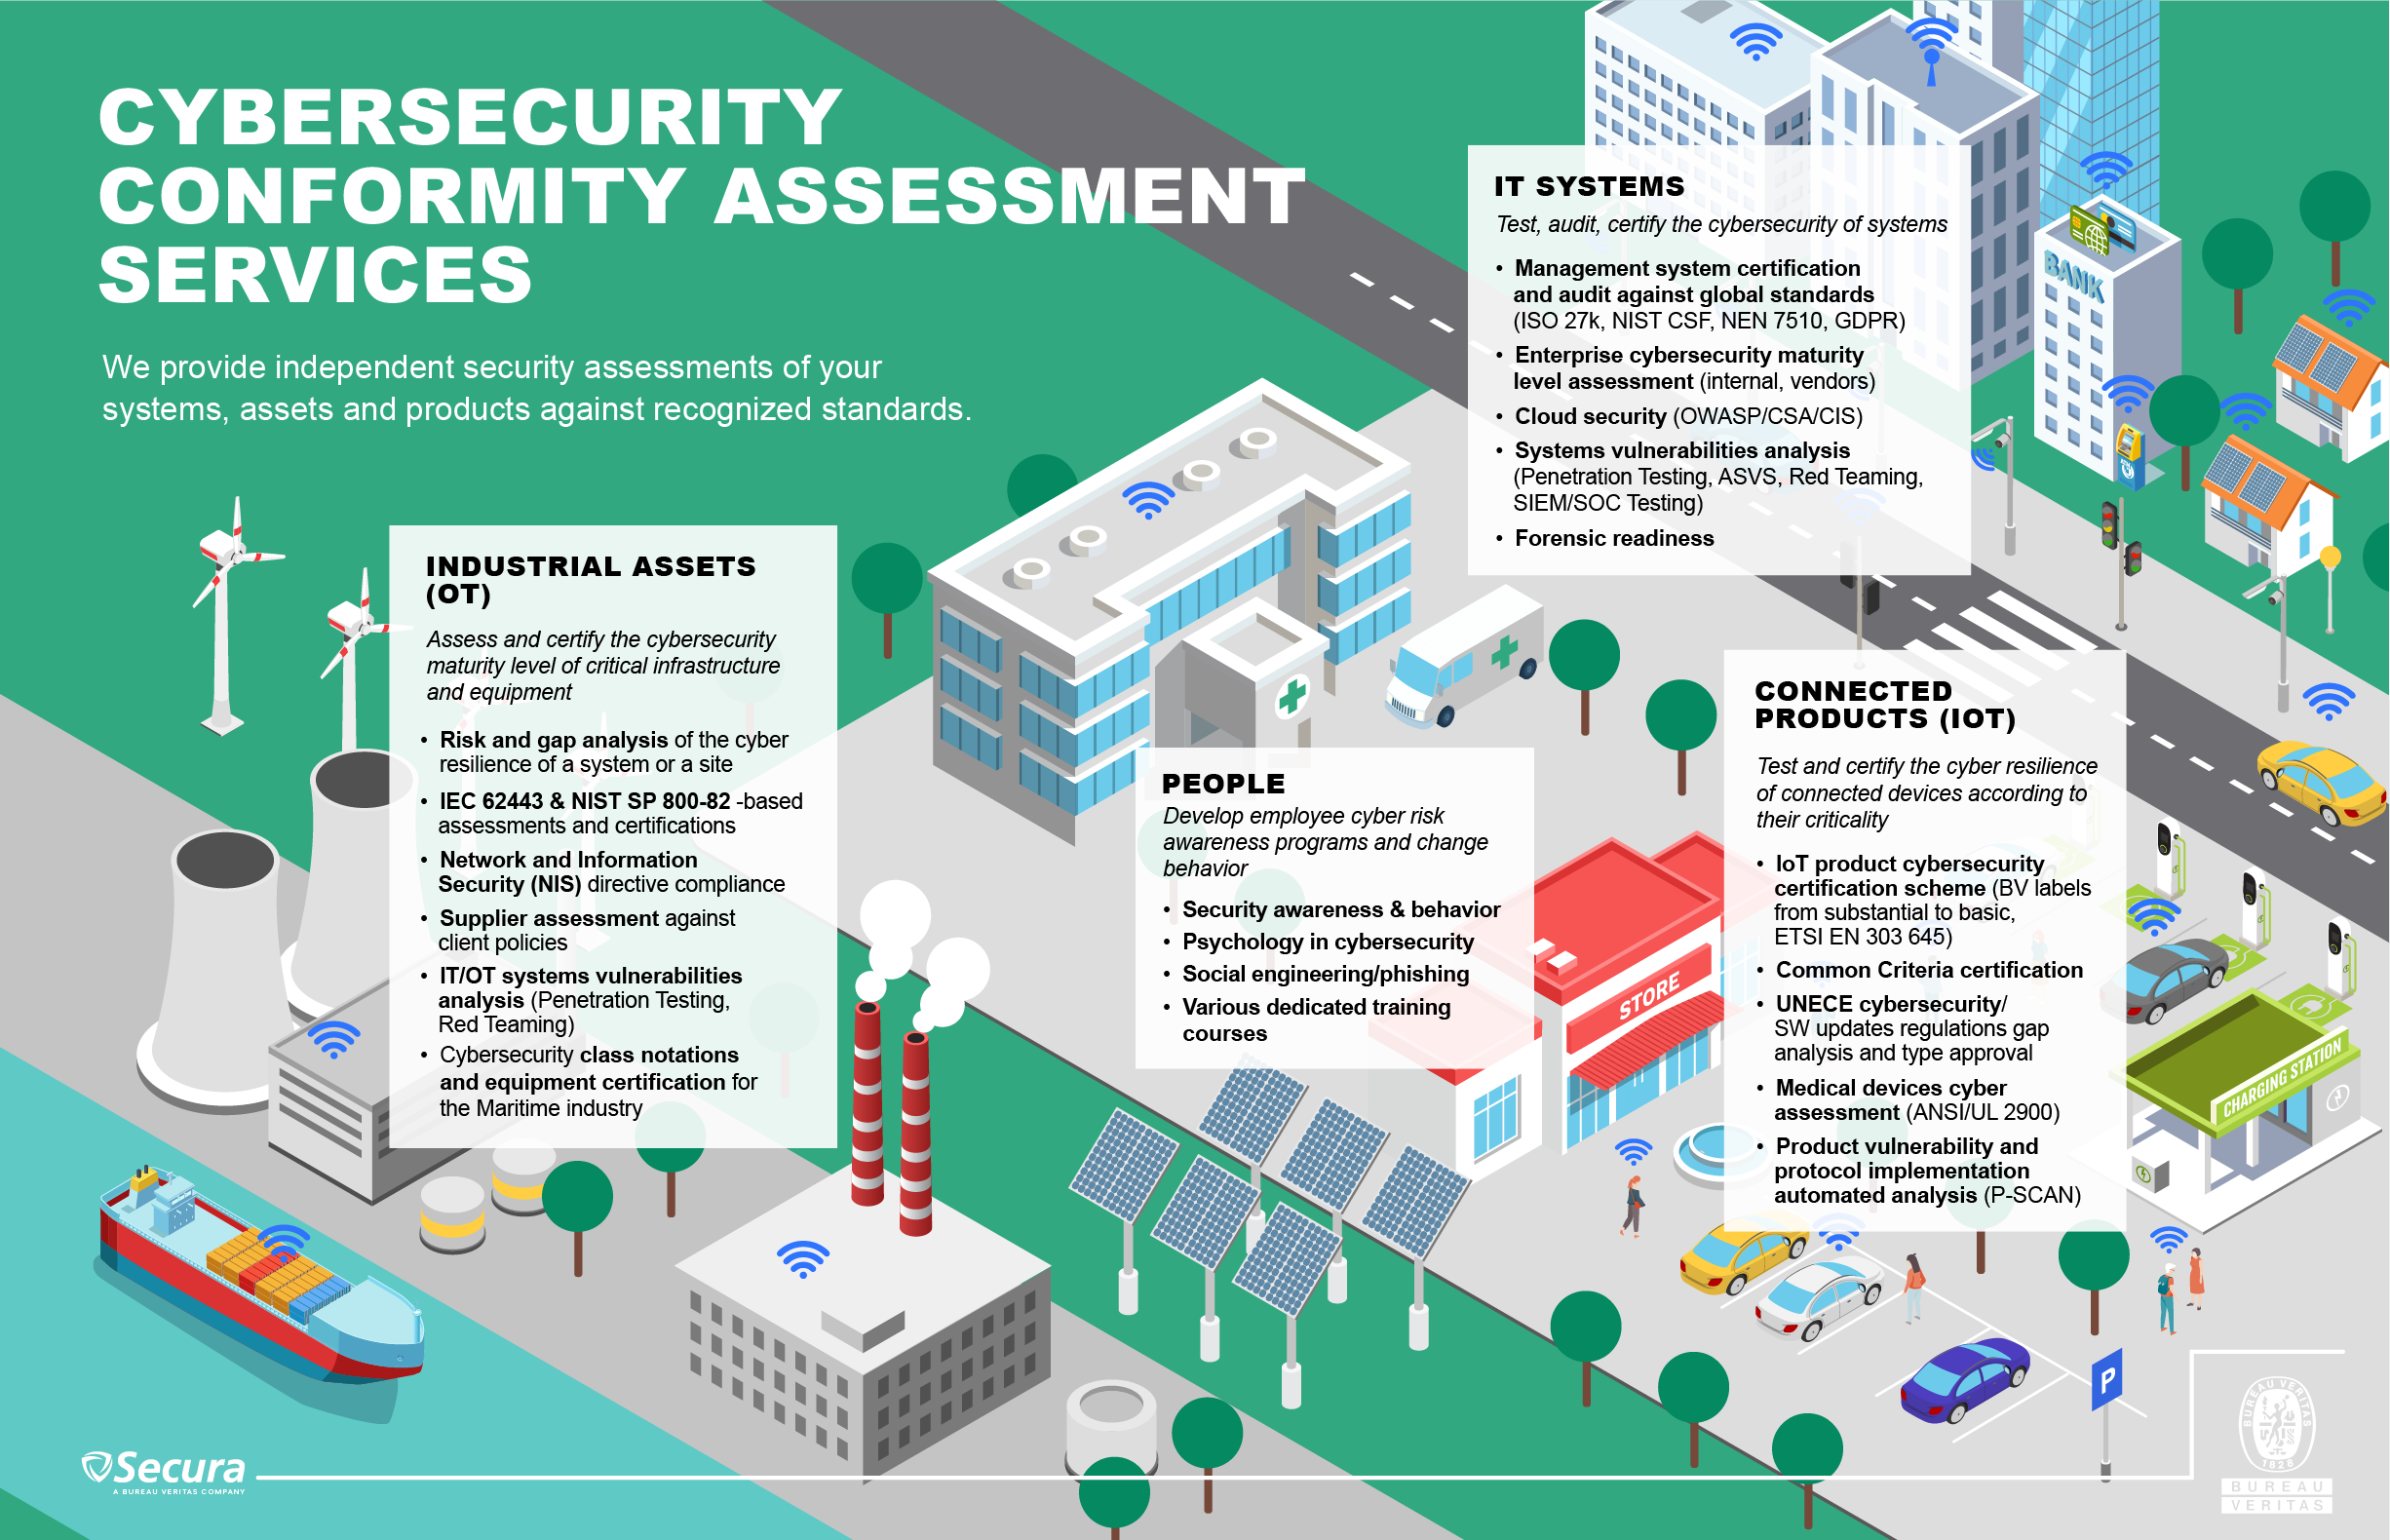 CYBERSECURITY CONFORMITY ASSESSMENT SERVICES